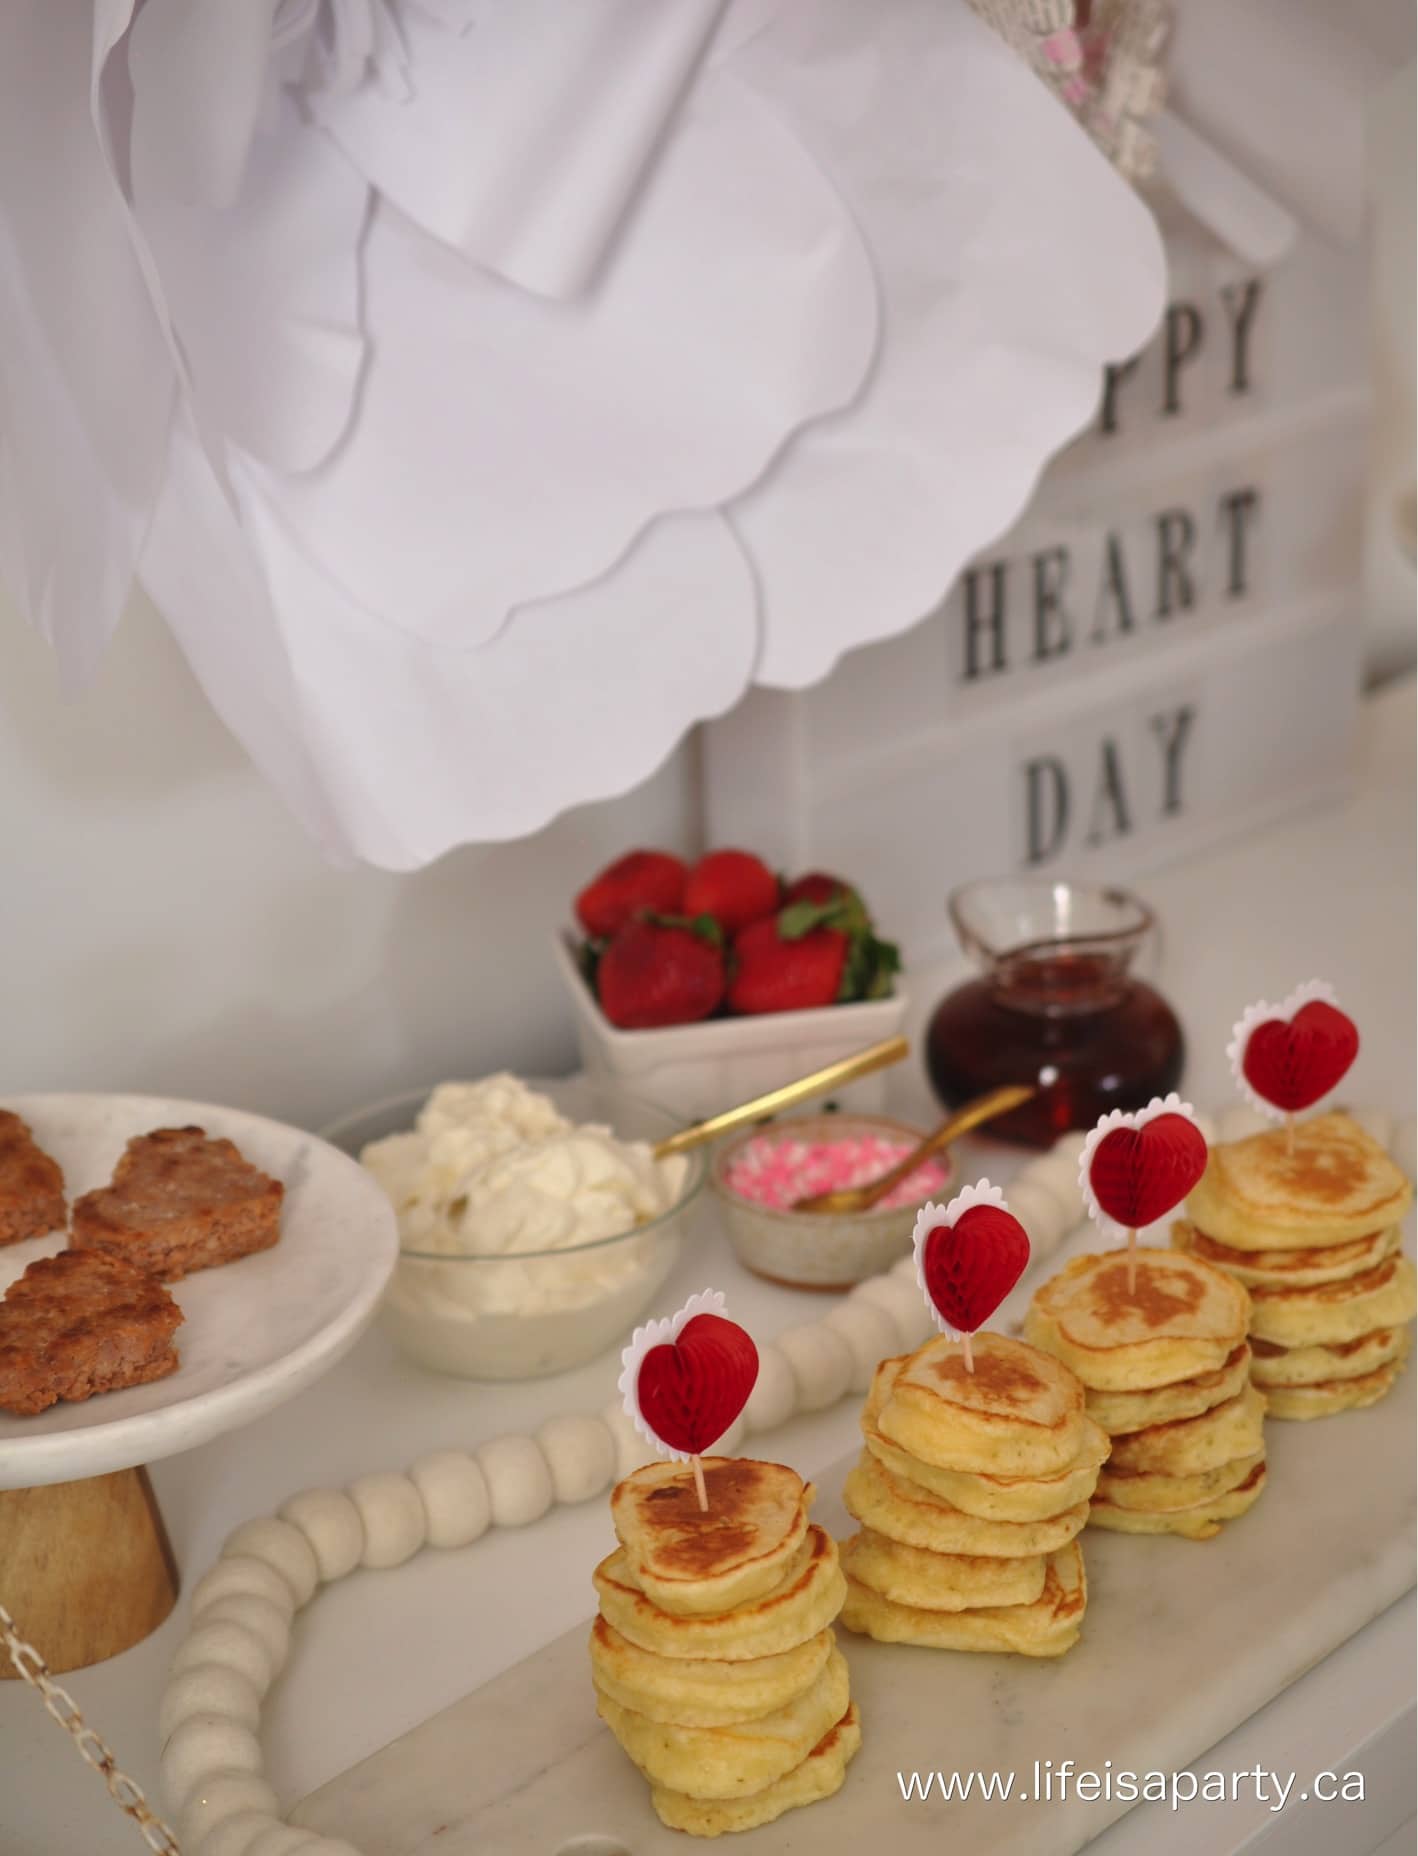 Valentine's Day Breakfast: the perfect inspiration with decor and menu for celebrating Valentine's Day with family and friends.